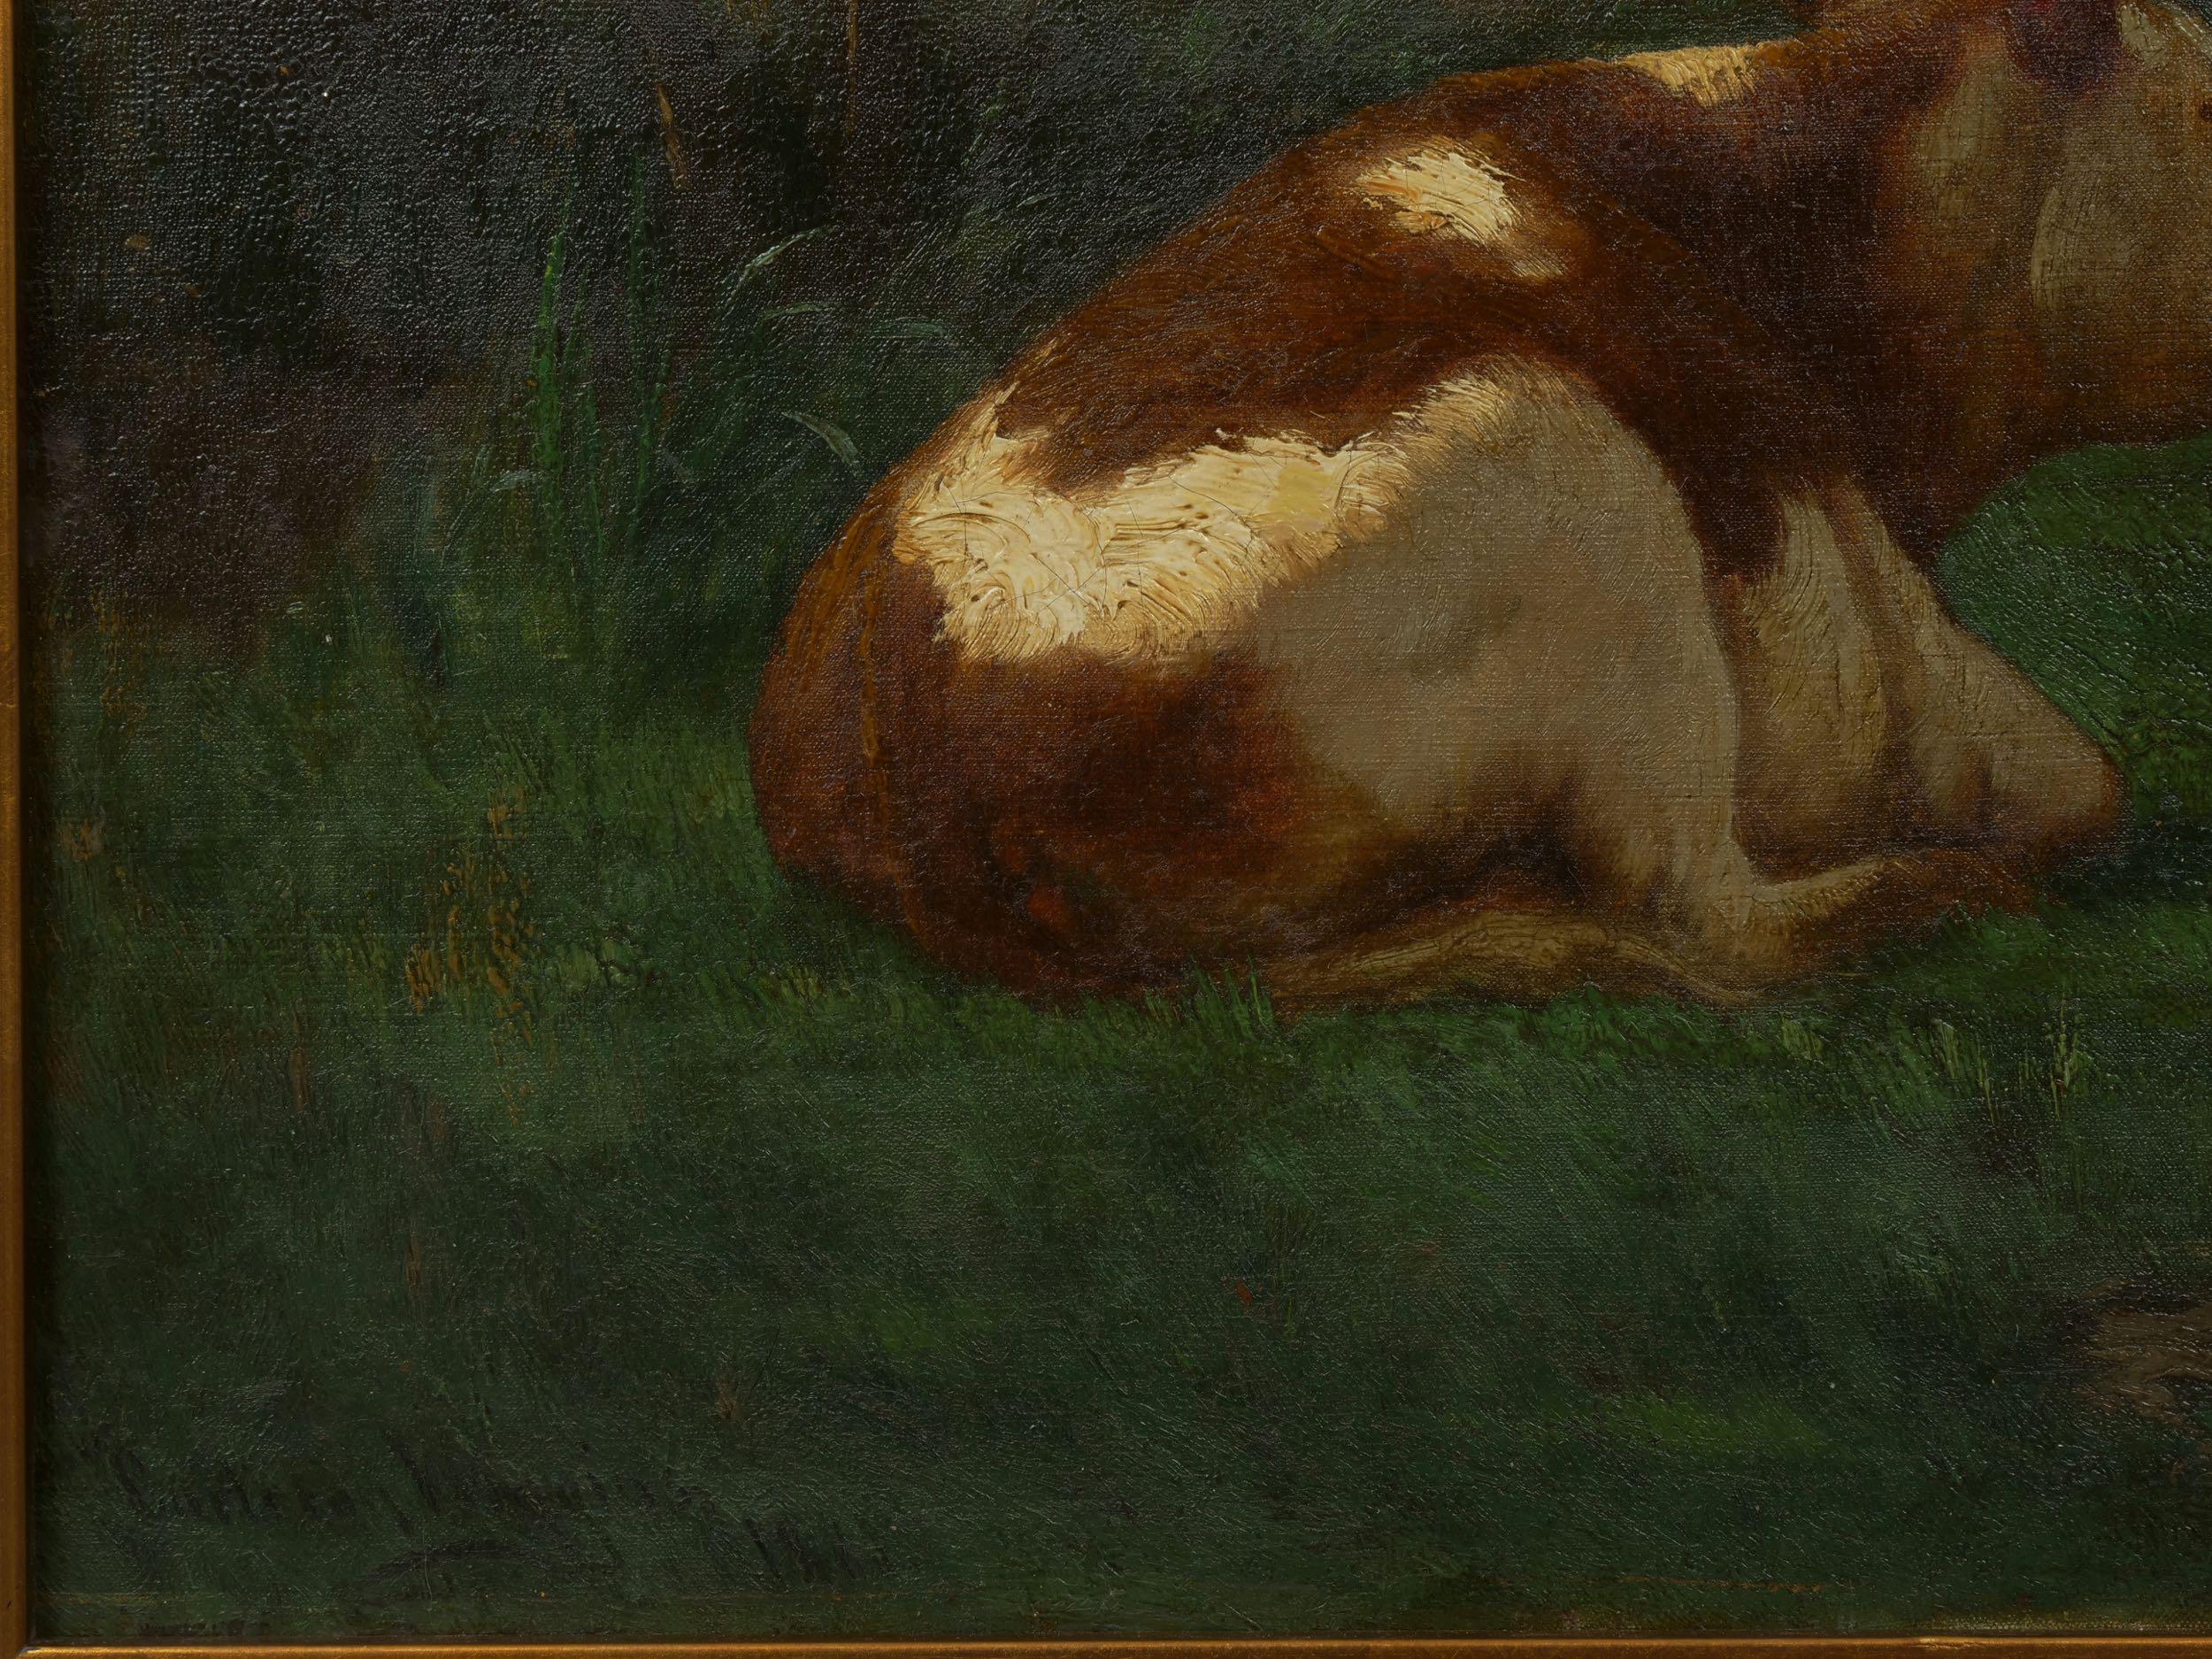 “Landscape of a Resting Bull” Oil Painting by John Carleton Wiggins 1